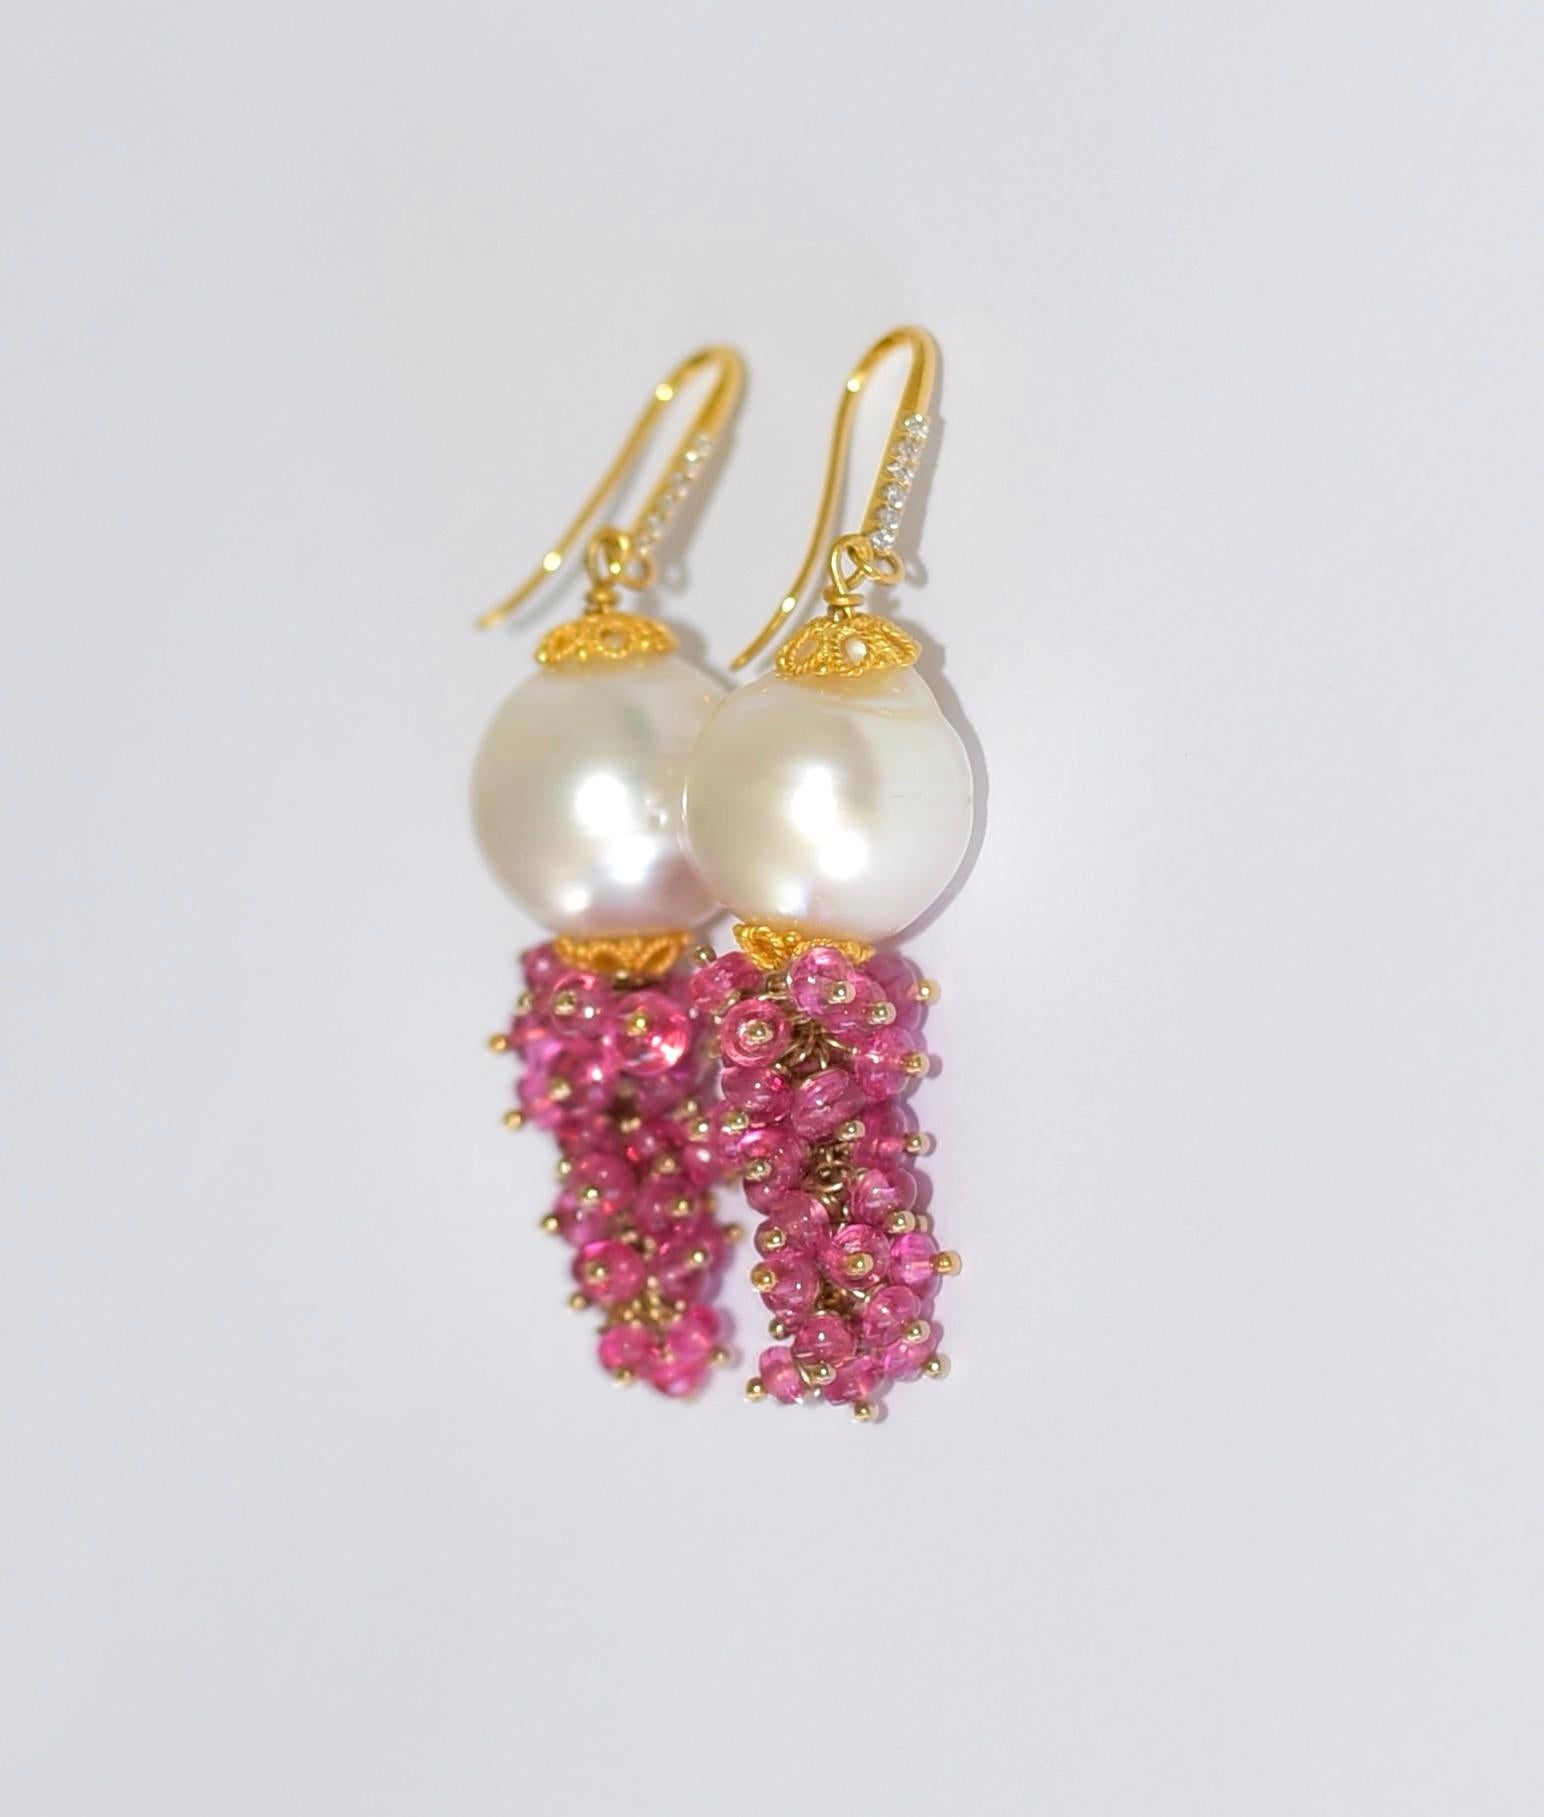 Bead Neon Hot Pink Burmese Jedi Spinel, South Sea Pearl Earrings in 14K Solid Gold For Sale